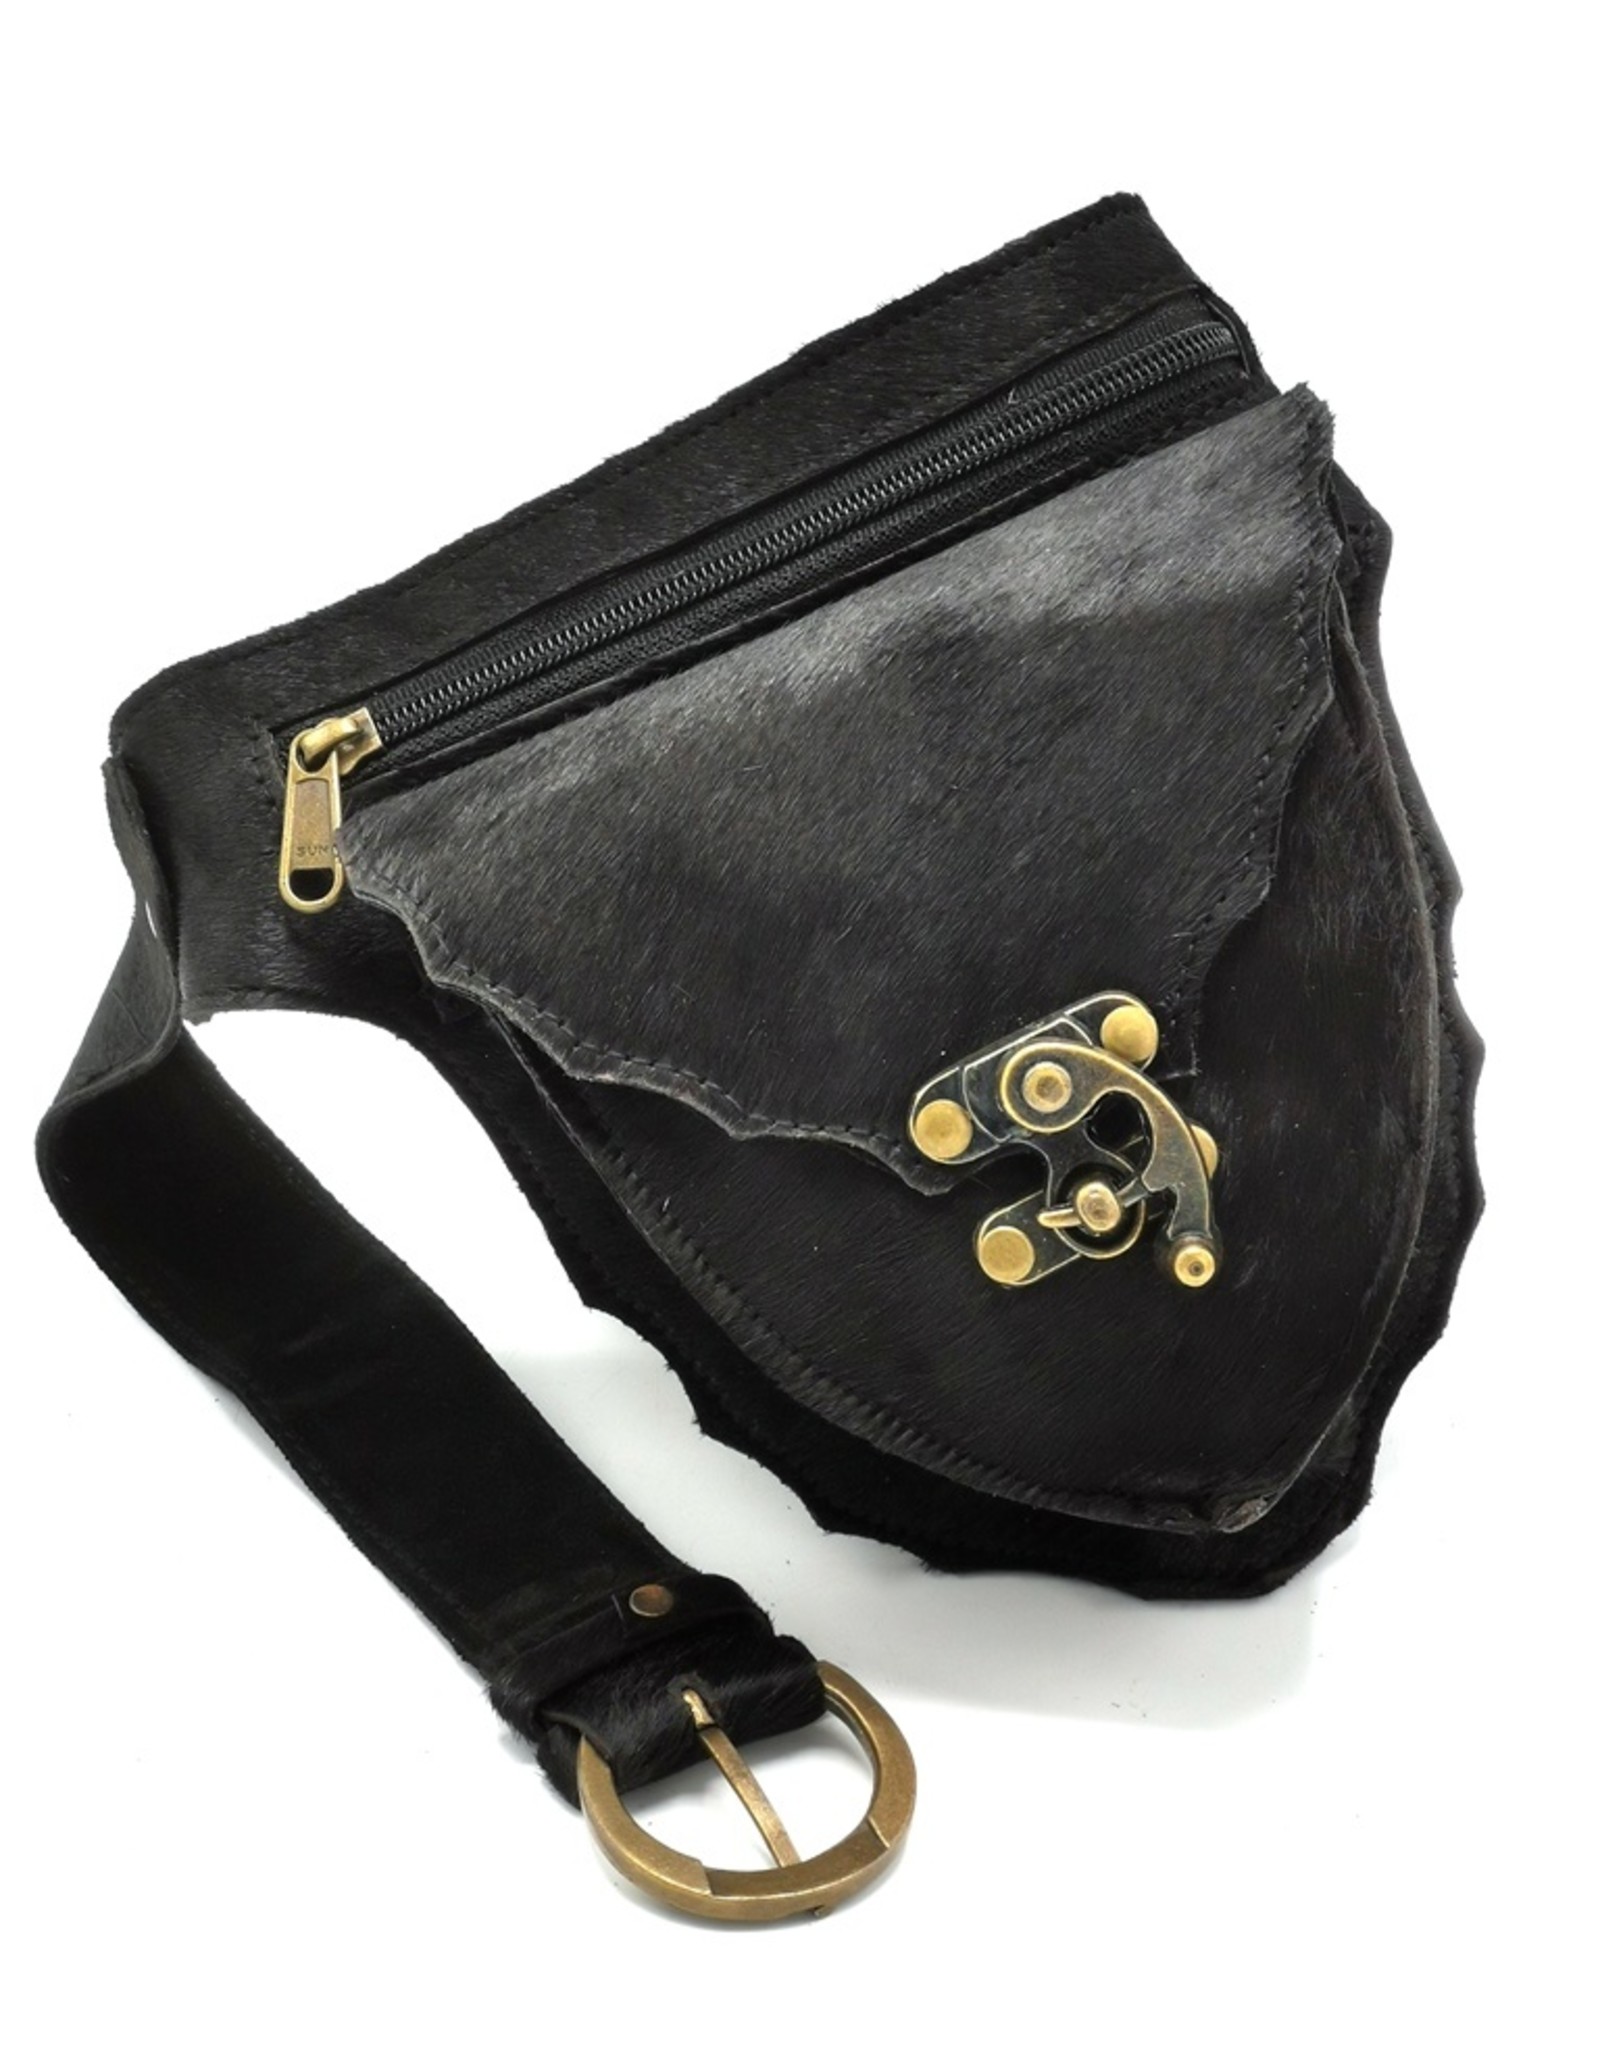 Trukado Small leather bags, cluches and more -  Cowhide Waistbag with Hook (black)